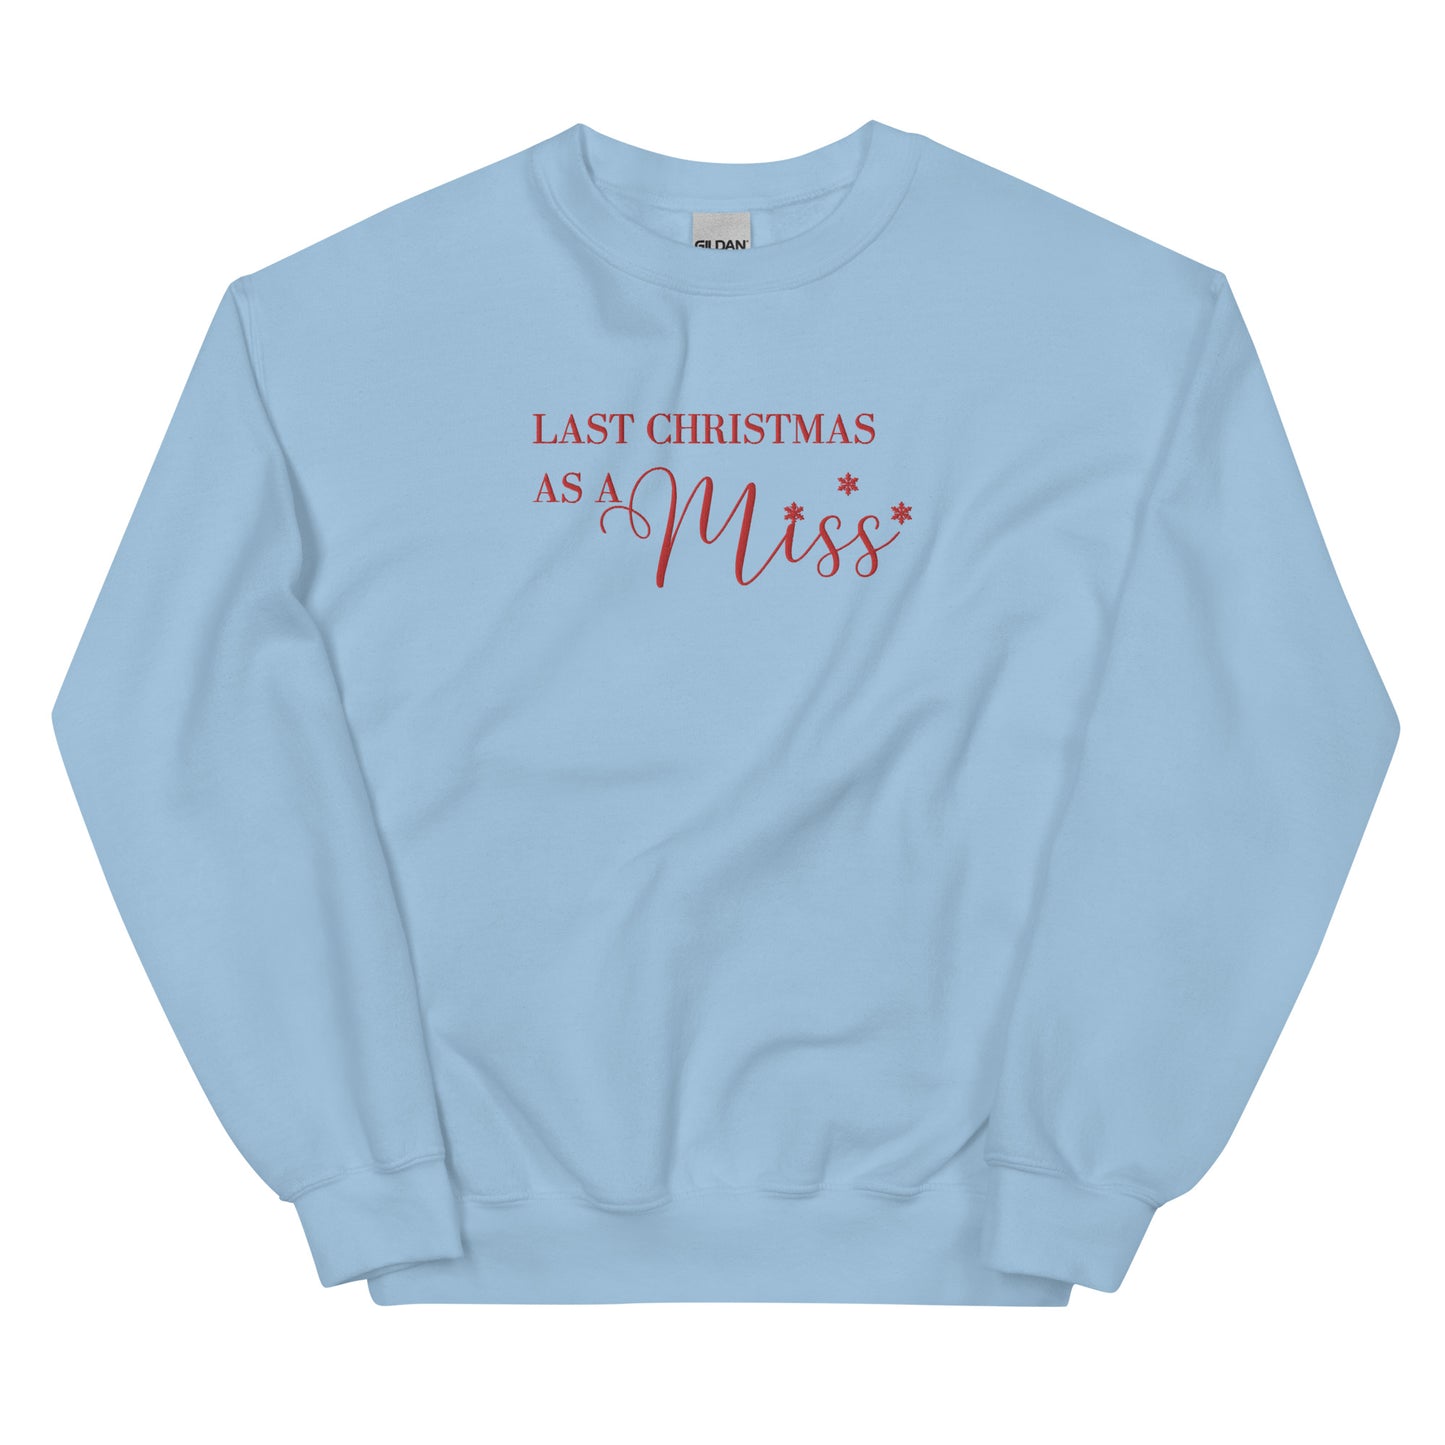 Last Christmas As A Miss - Red Embroidered - Crewneck Sweatshirt